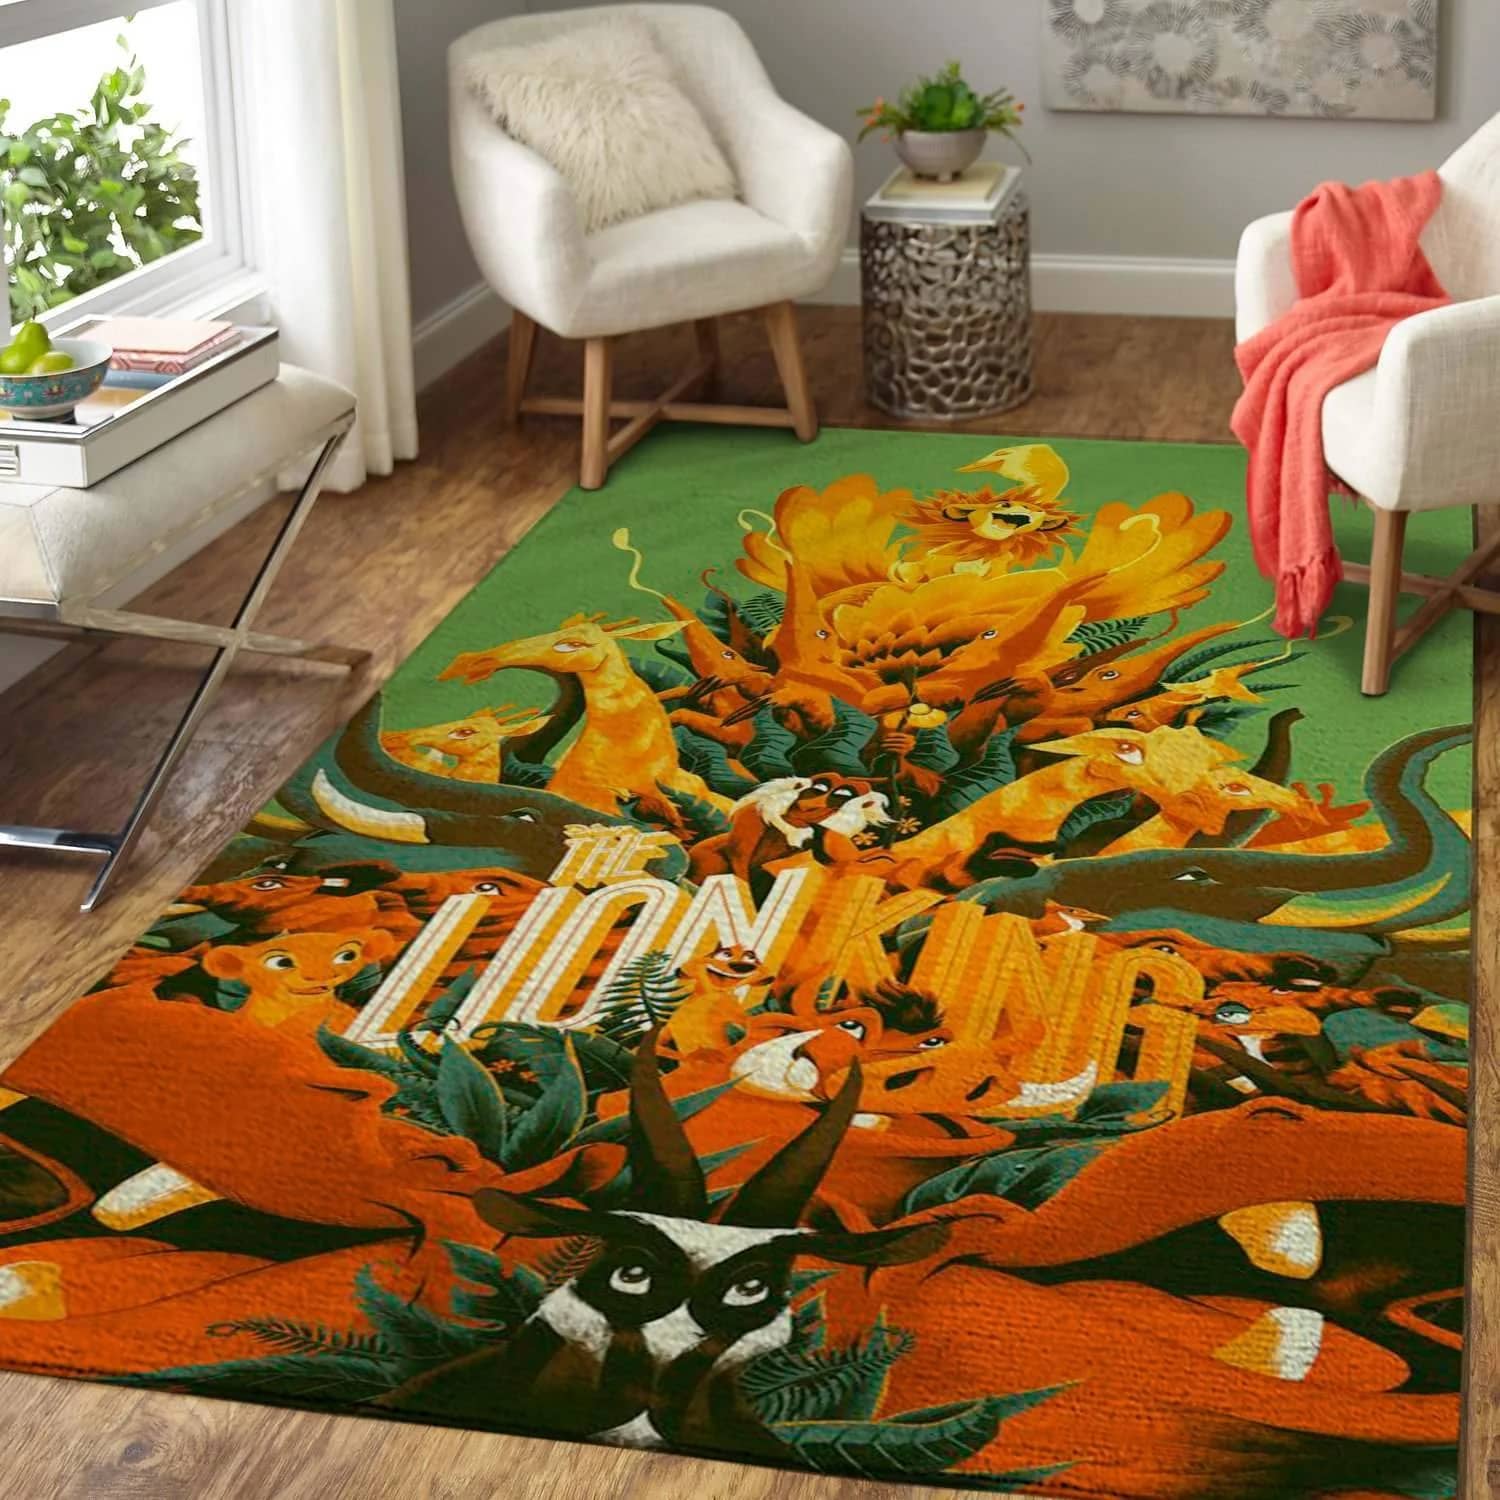 Disney Movie The Lion King Area Limited Edition Amazon Best Seller Sku 267276 Rug